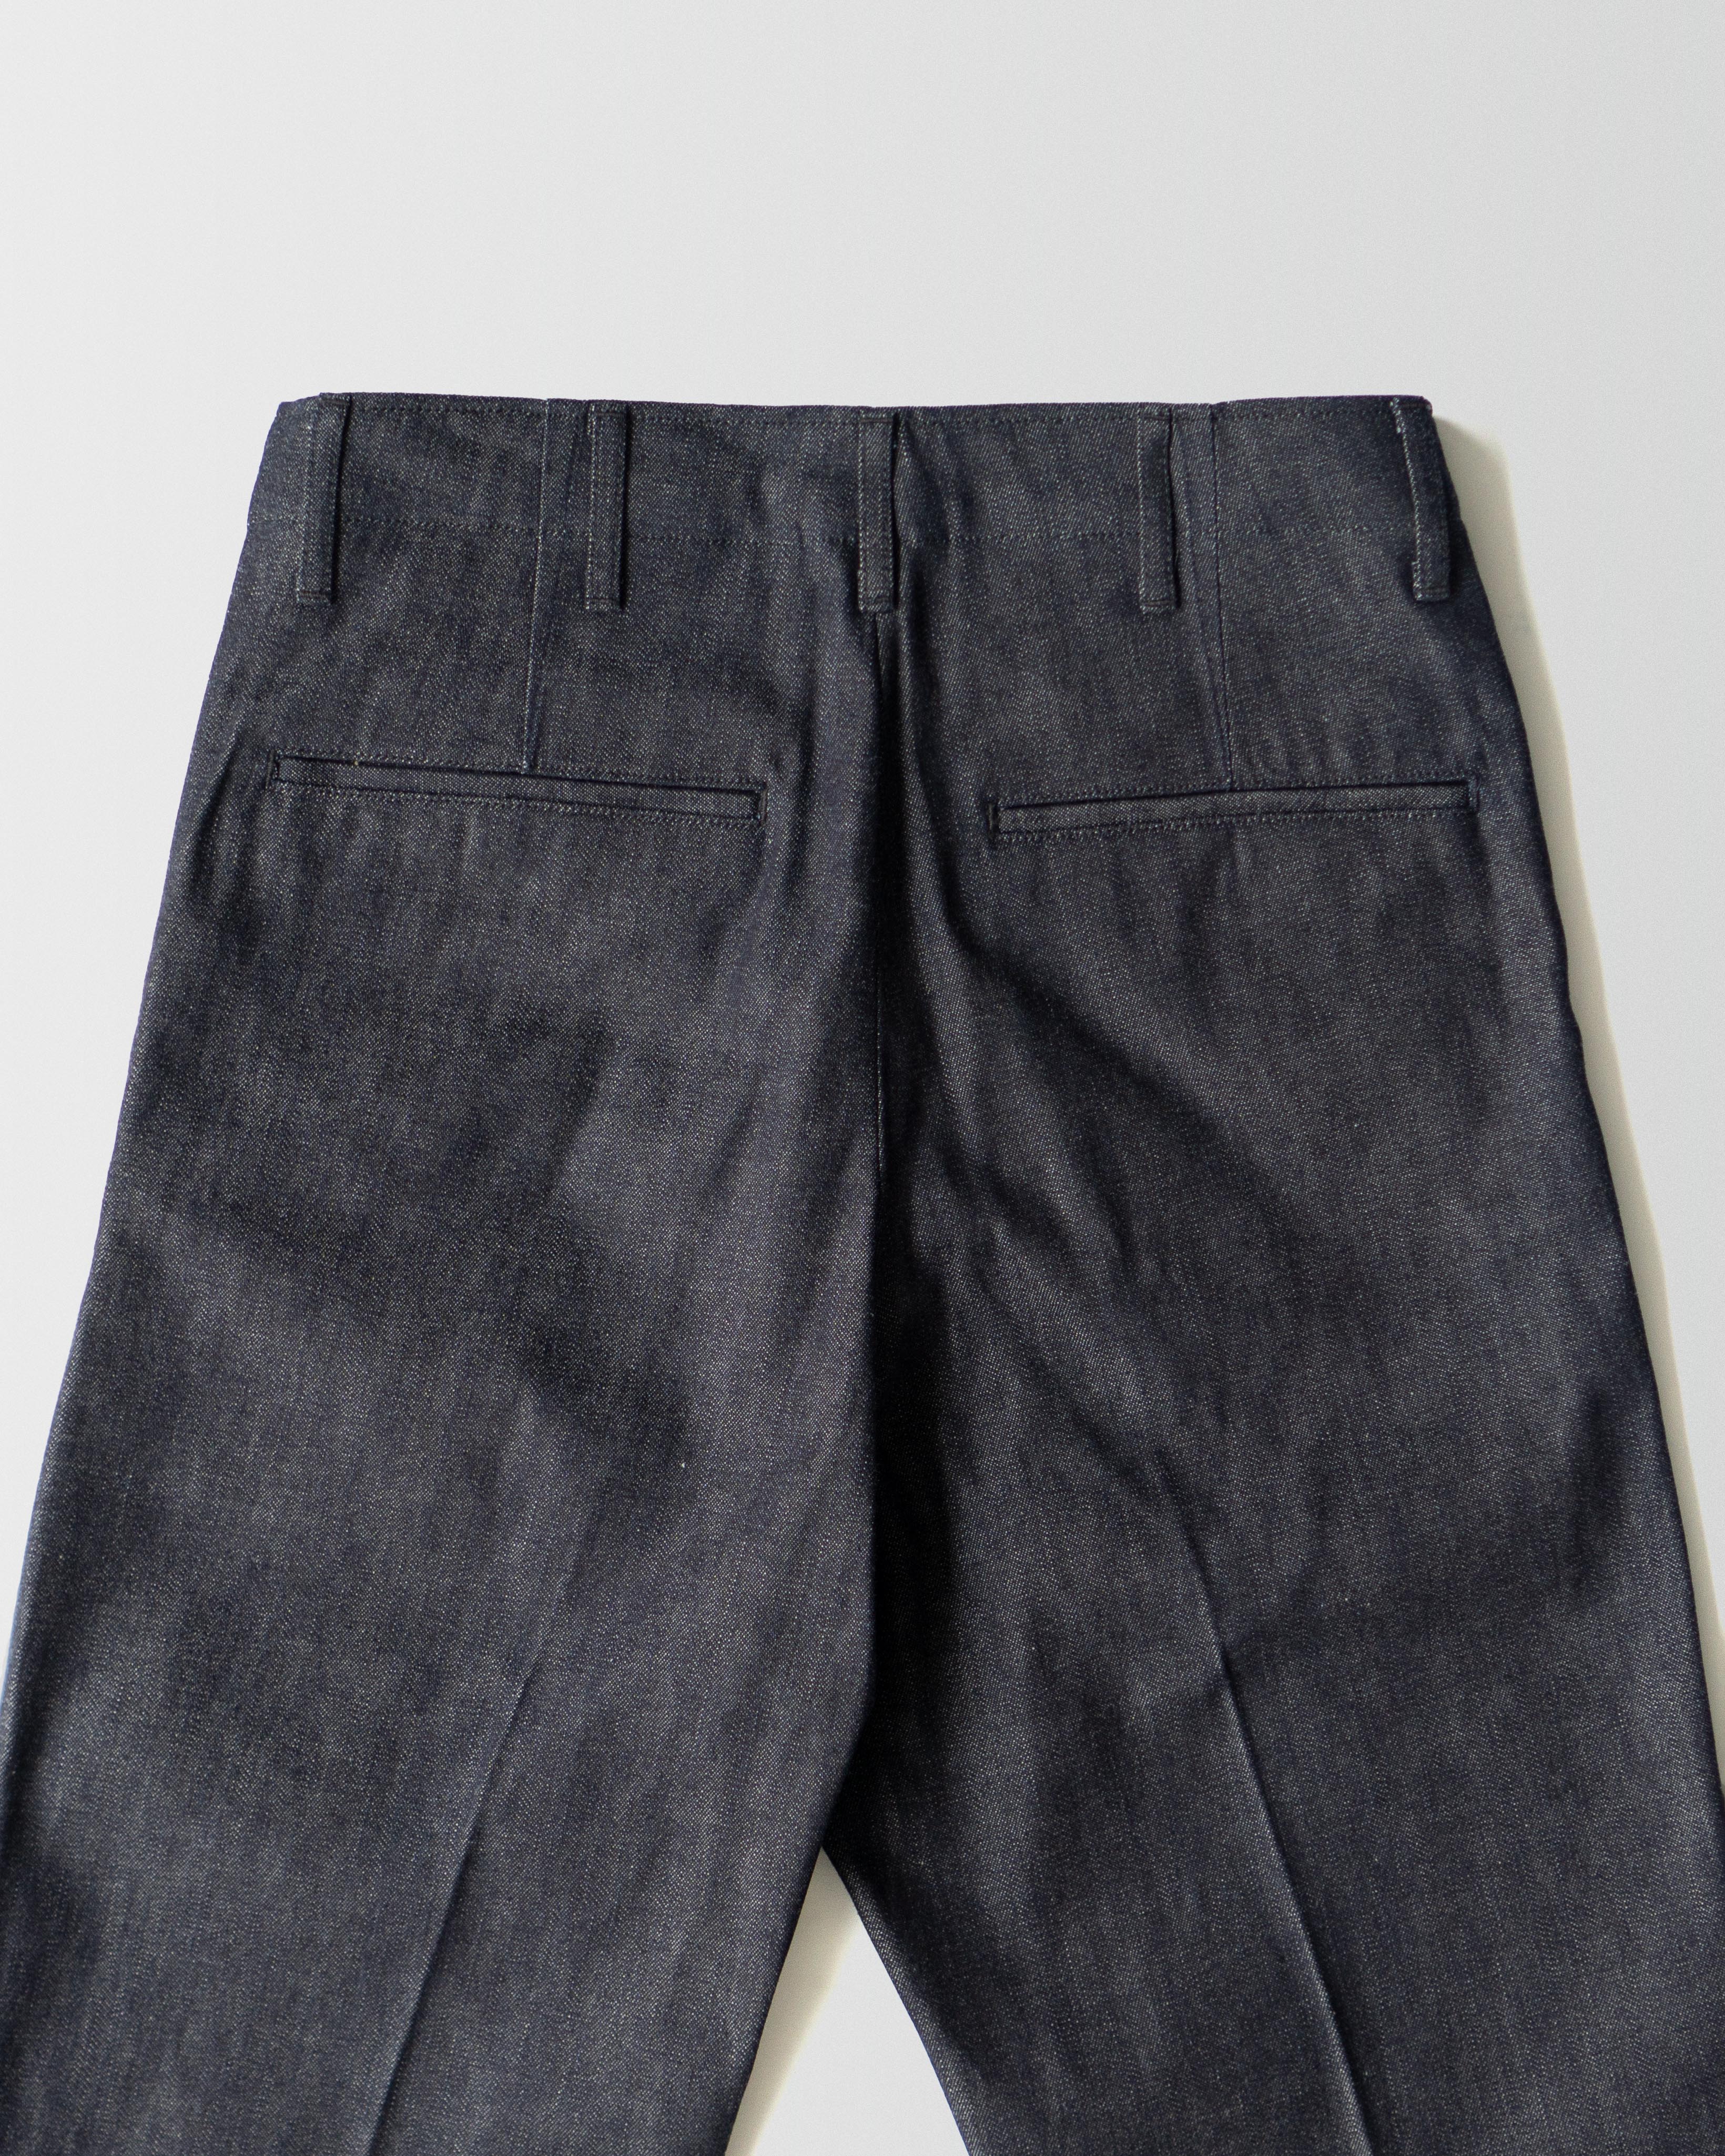 SS Chino Pants HW Unwashed